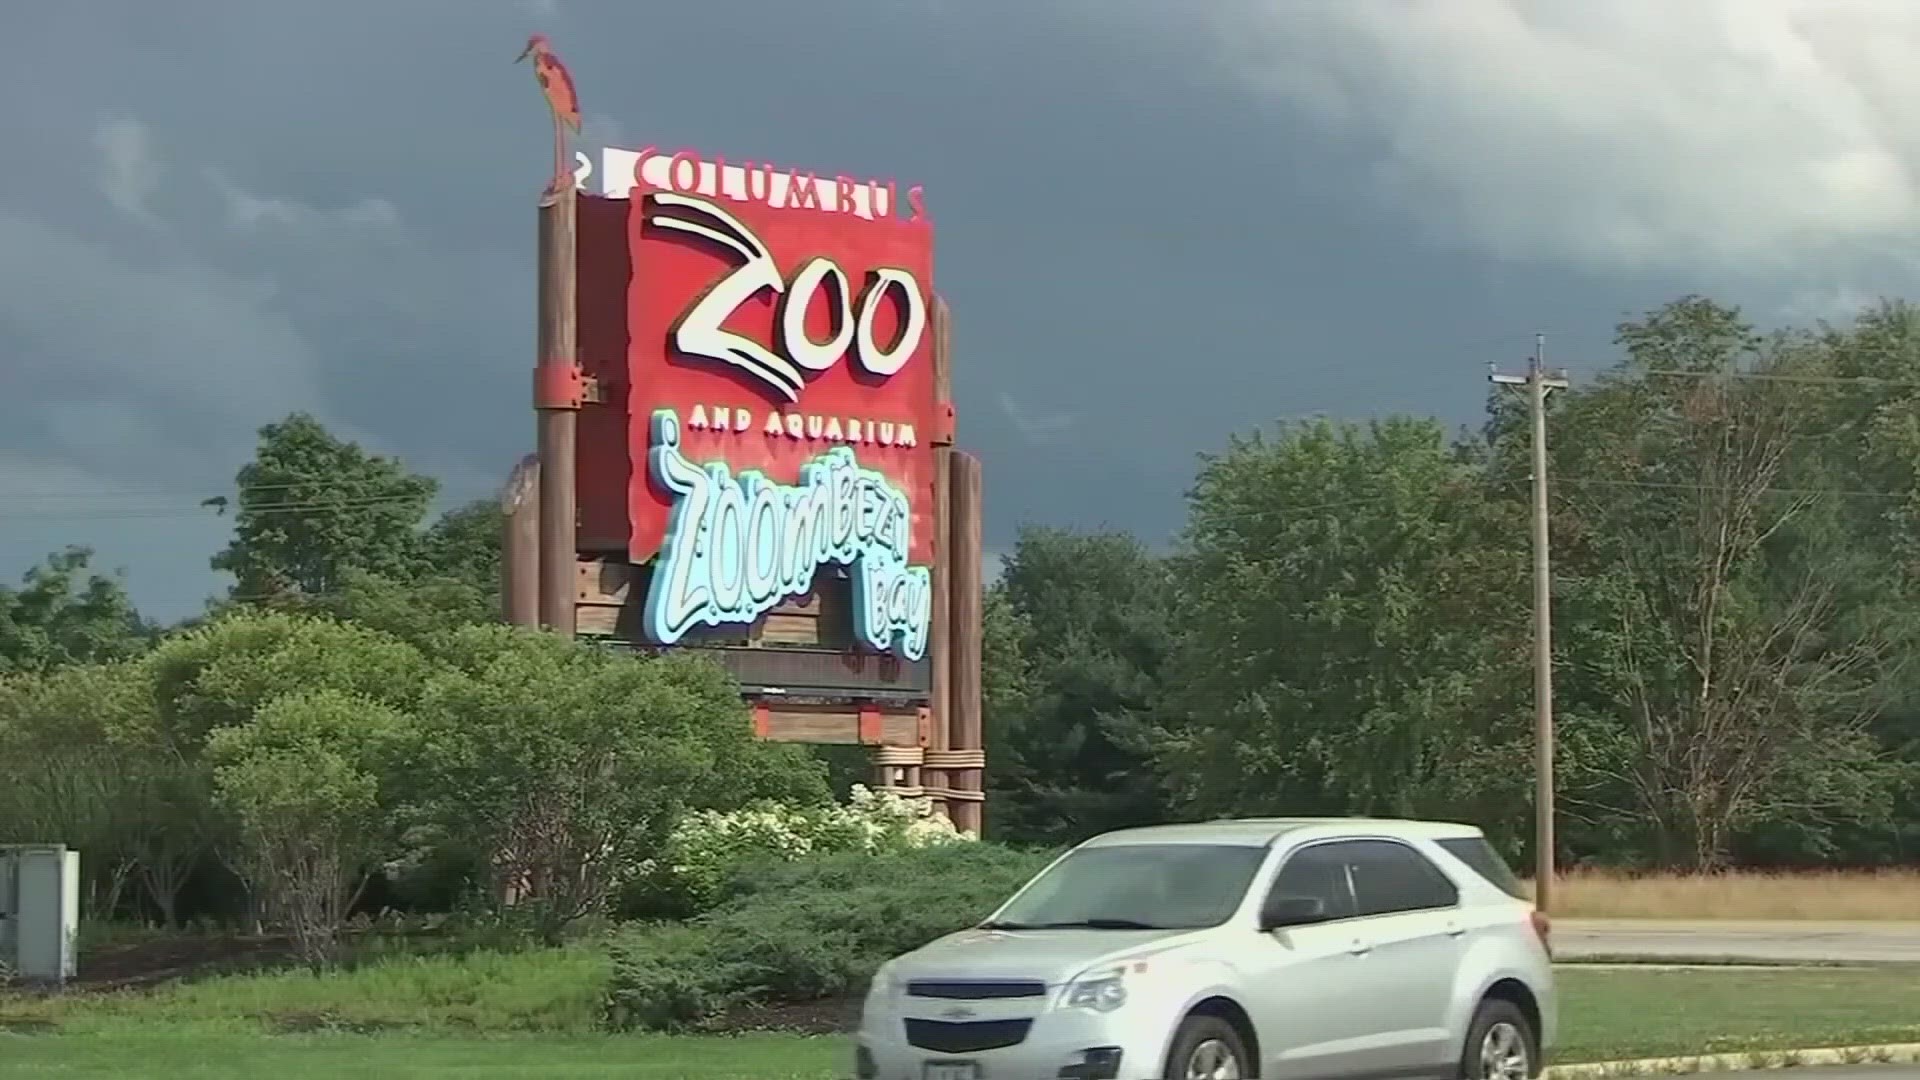 The indictments come after four former zoo employees were accused of losing more than $630,000 and misusing zoo resources in 2021.